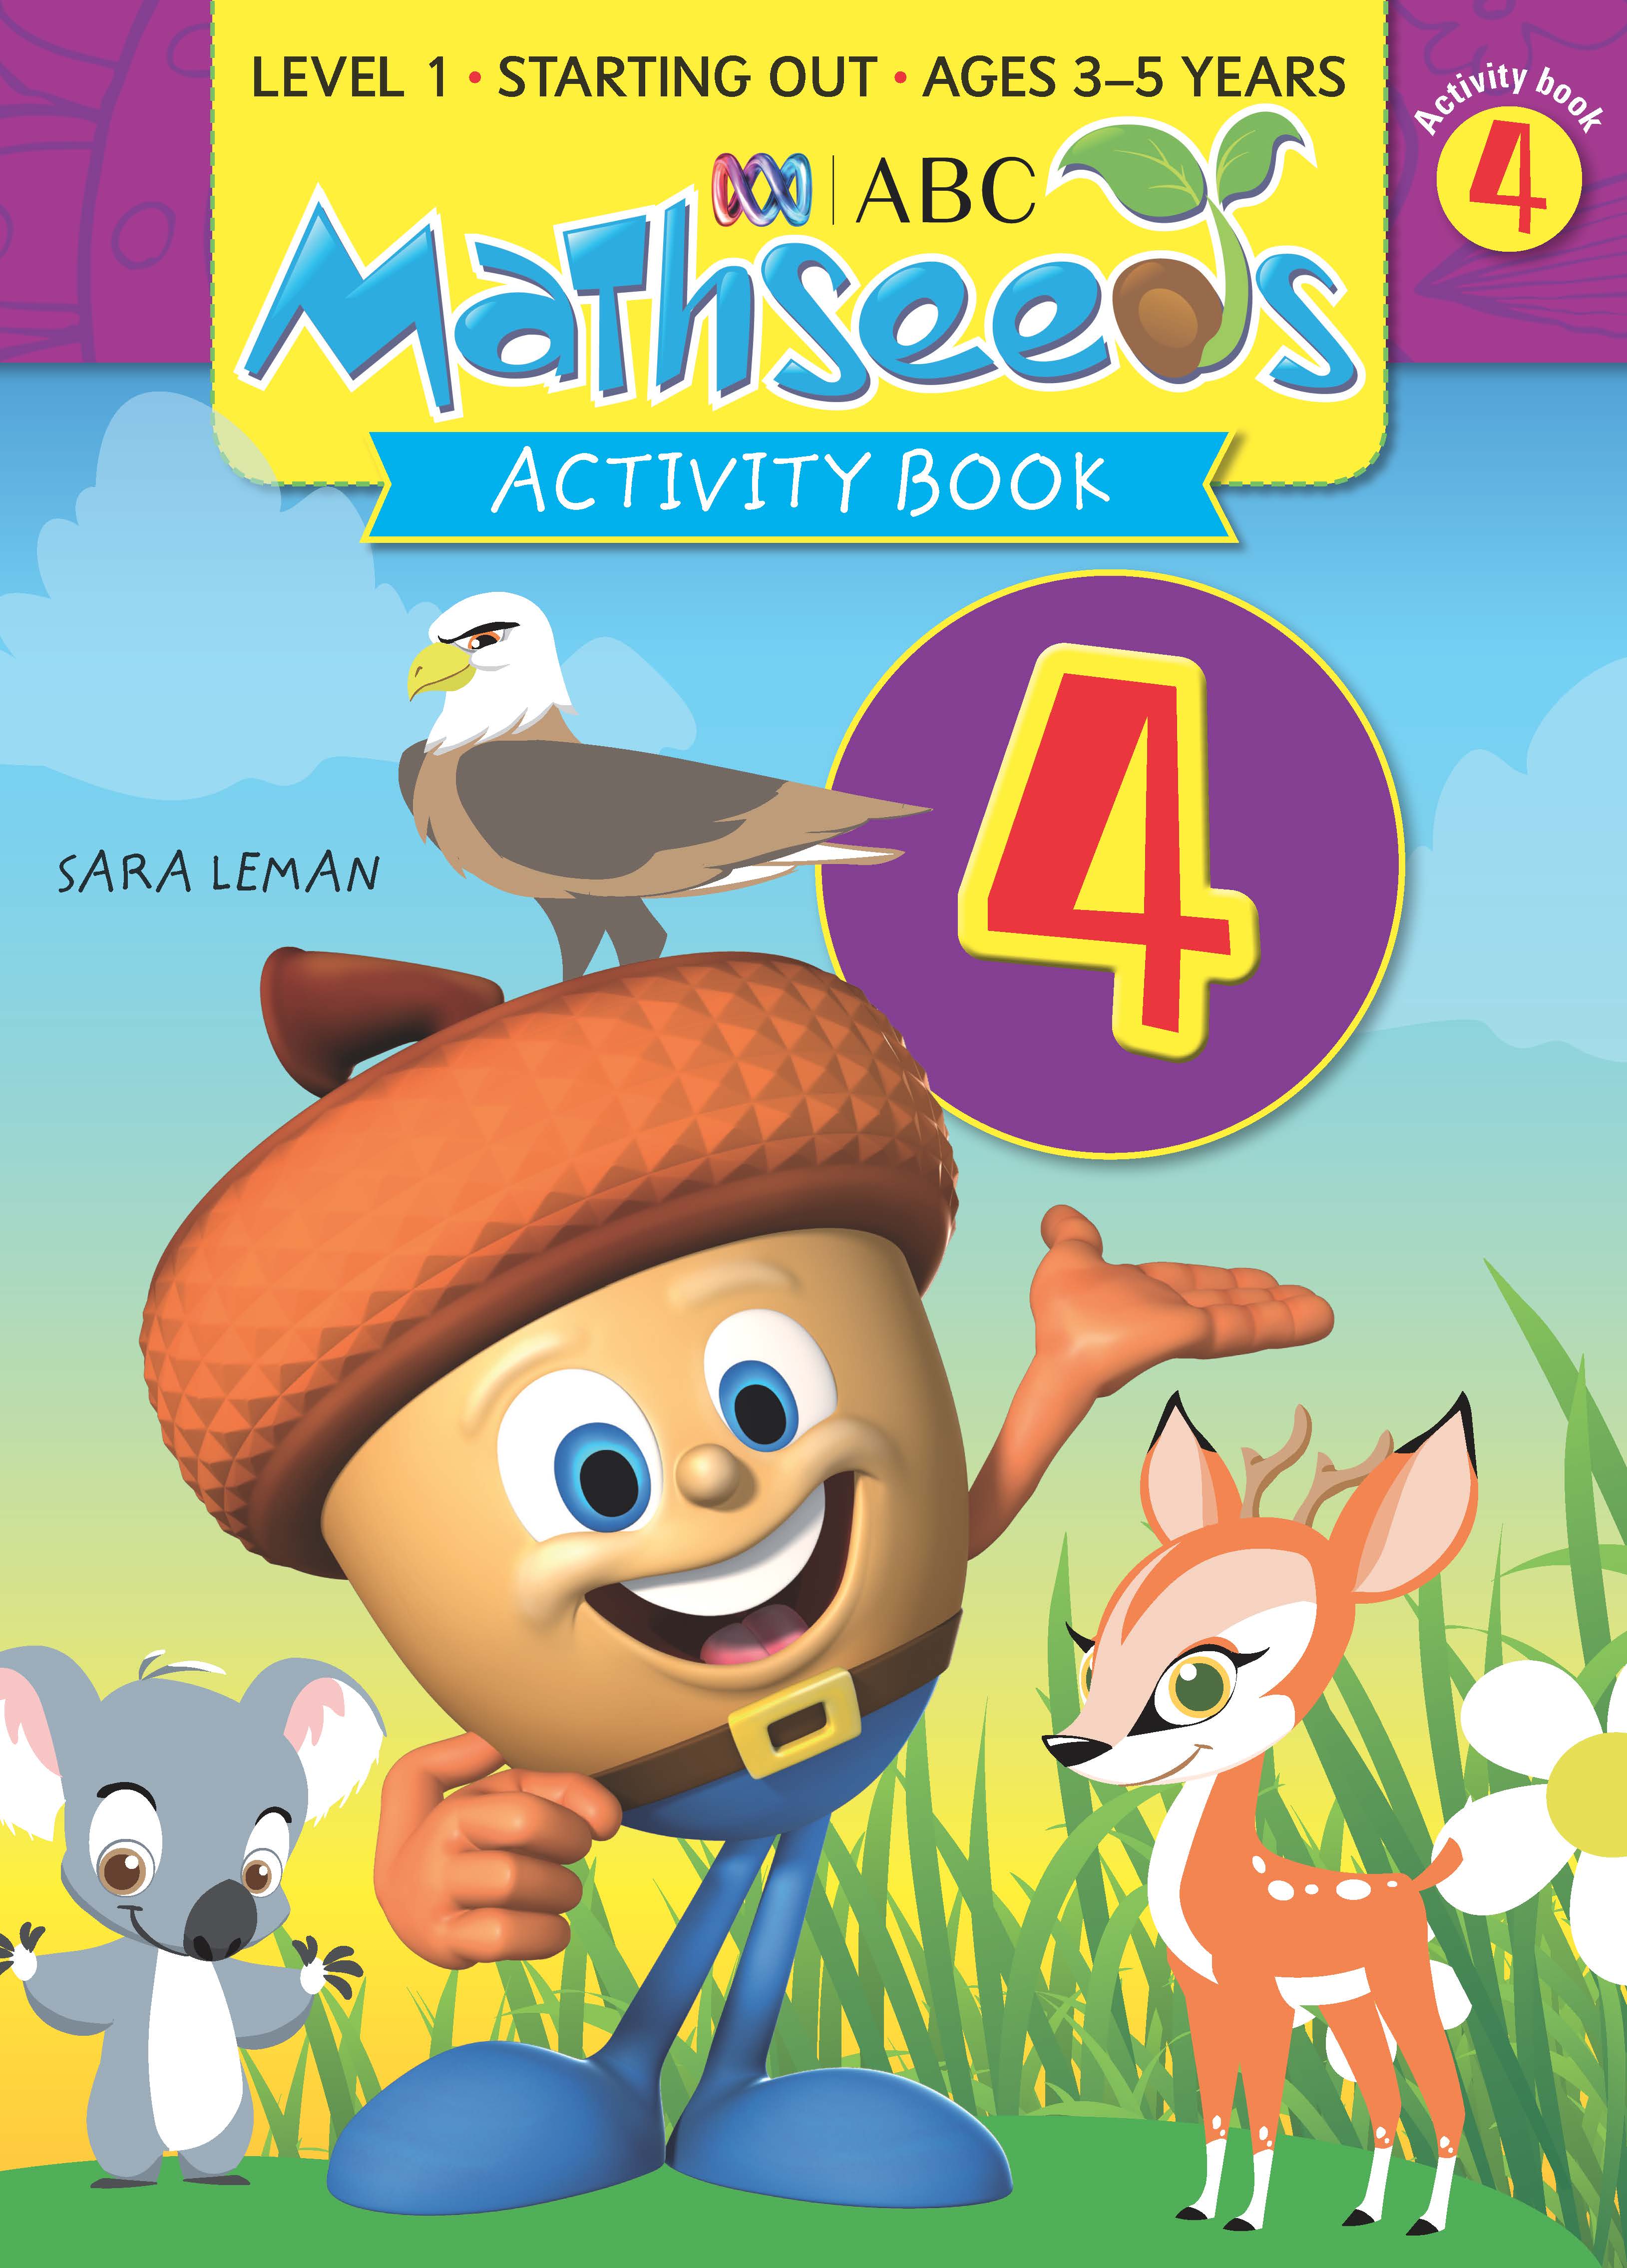 Picture of ABC Mathseeds Activity Book 4 Level 1 Ages 3-5